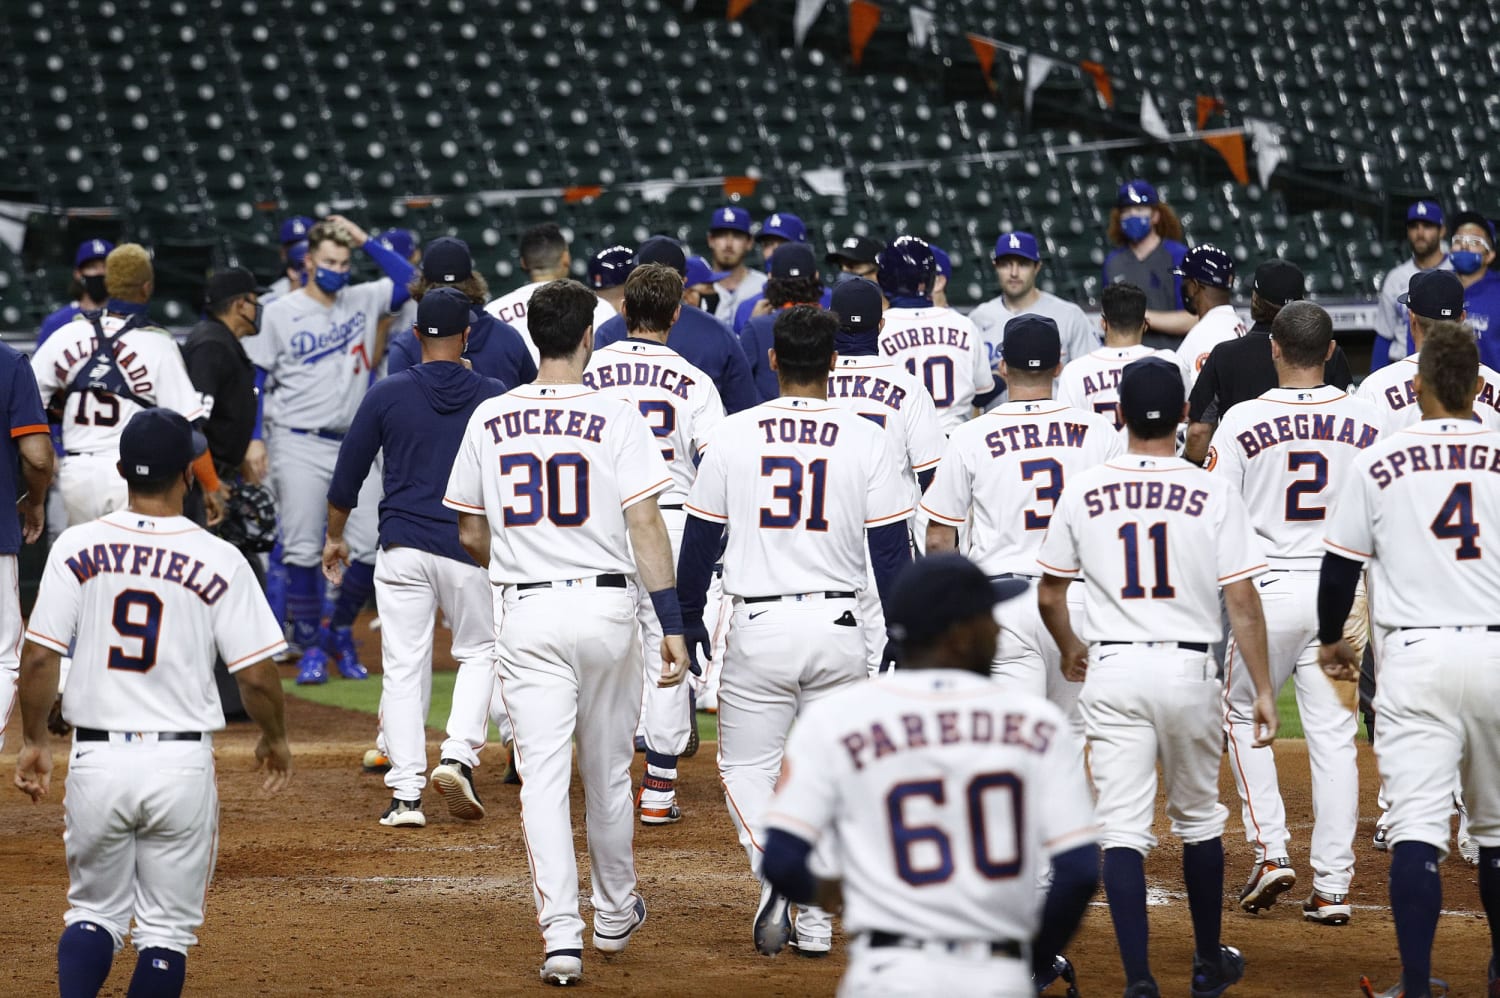 Altuve breaks out with 3 hits to help Astros even Fall Classic